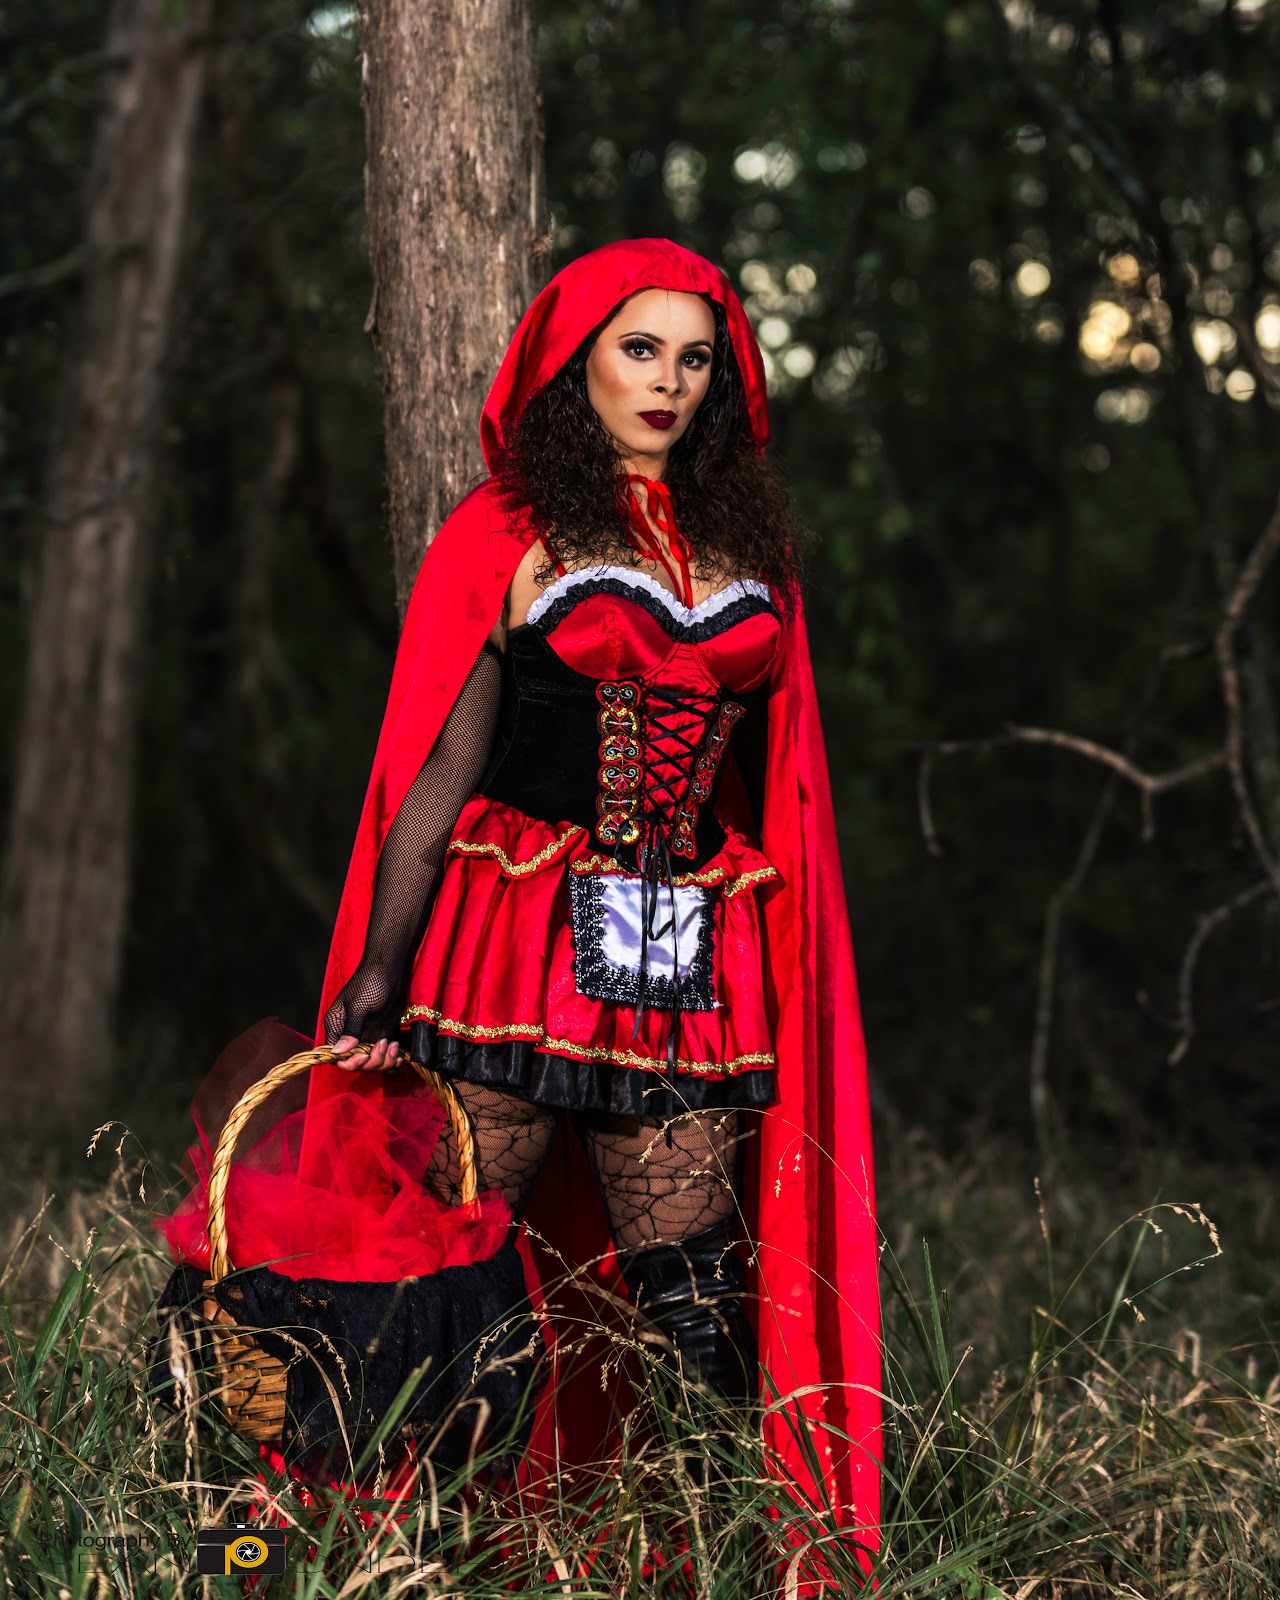 Photography by Sean Ponder: The Little Red Riding Hood - A Cosplay Shoot